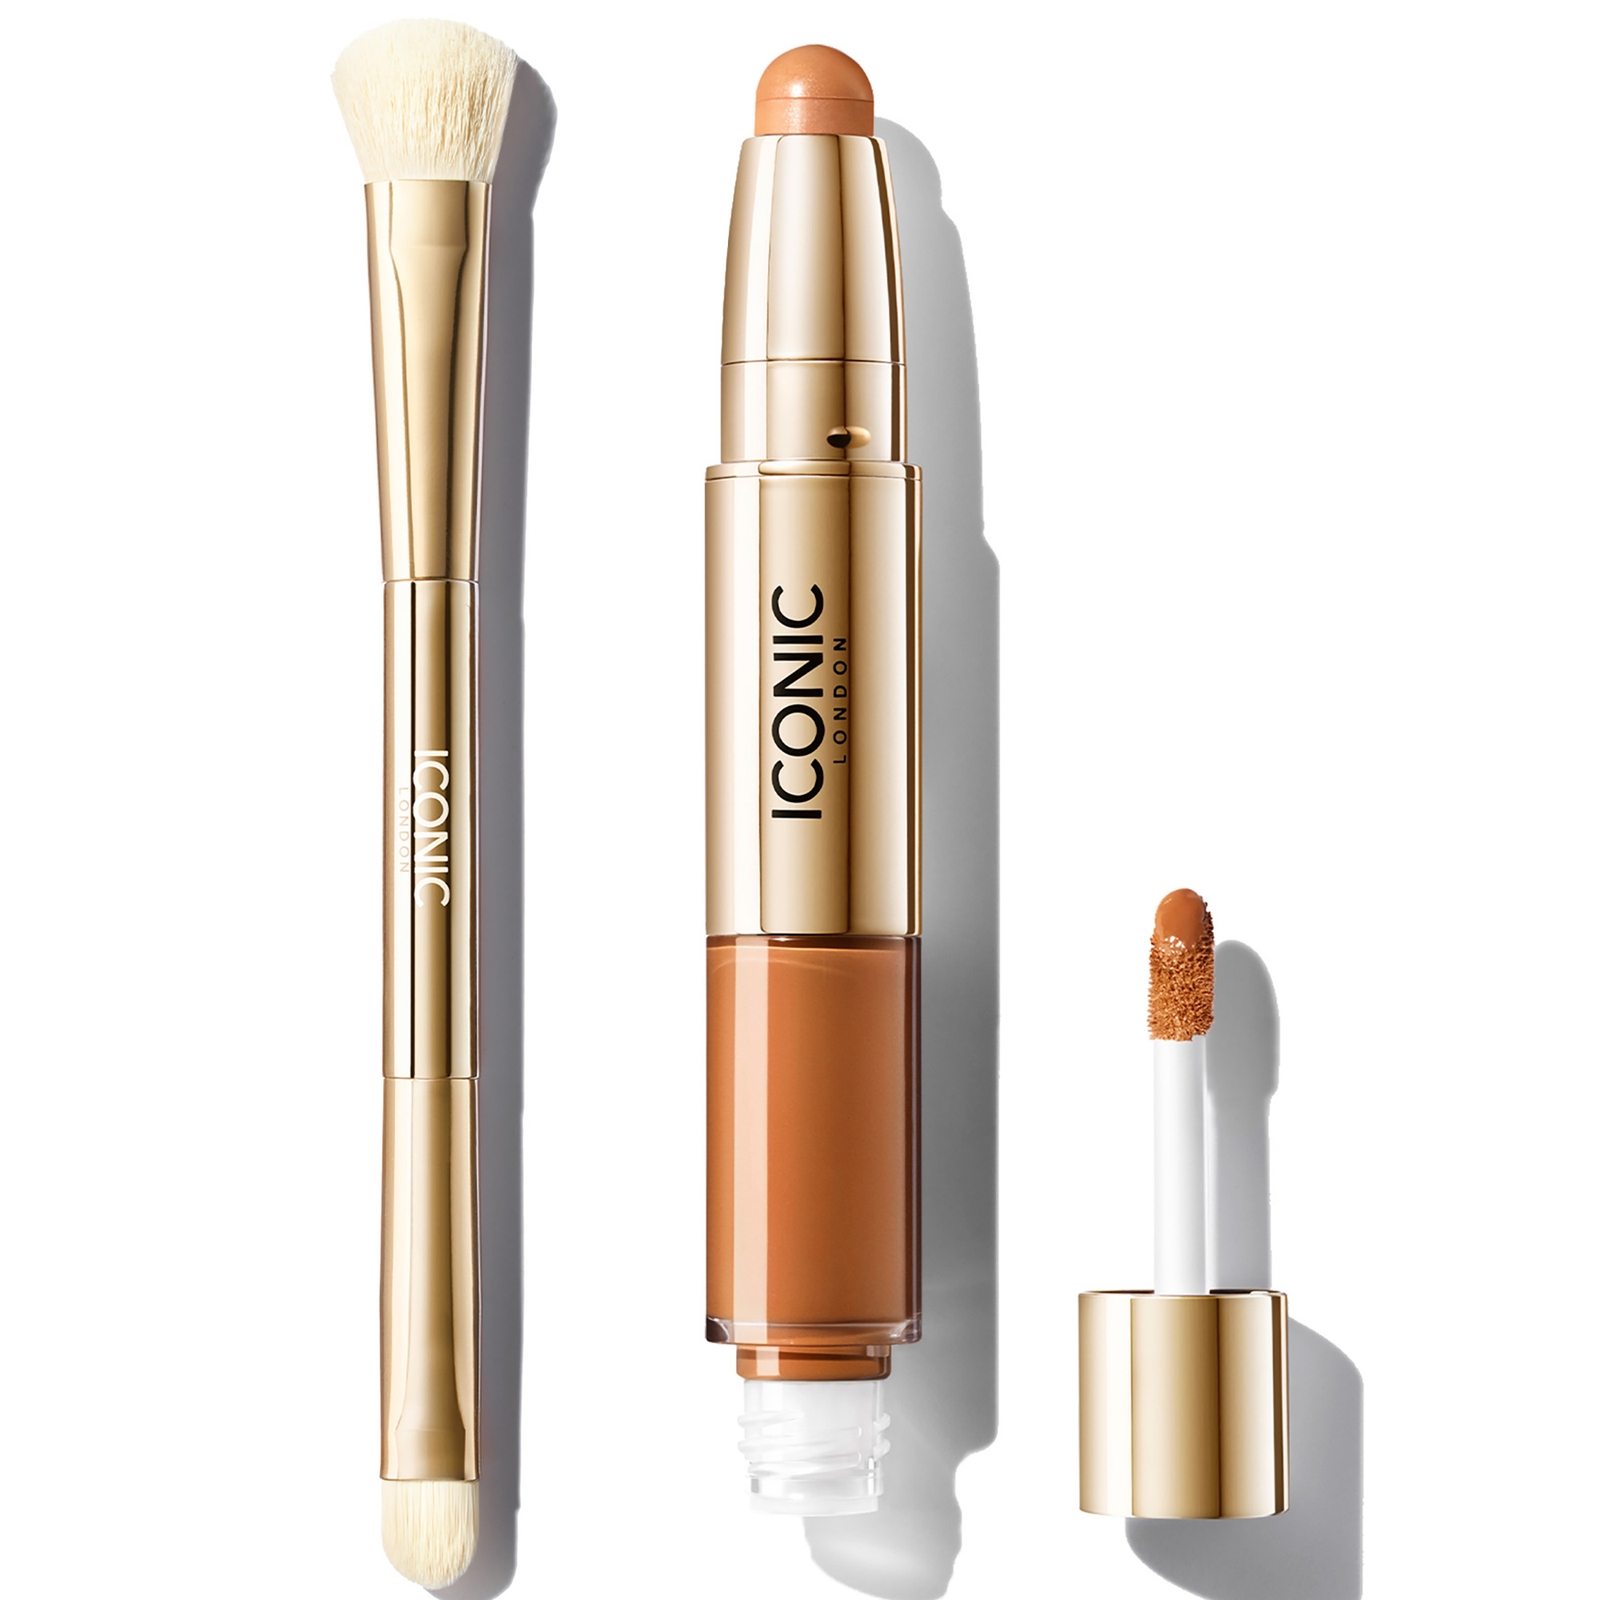 Iconic London Radiant Concealer And Brush Bundle (various Shades) - Warm Deep